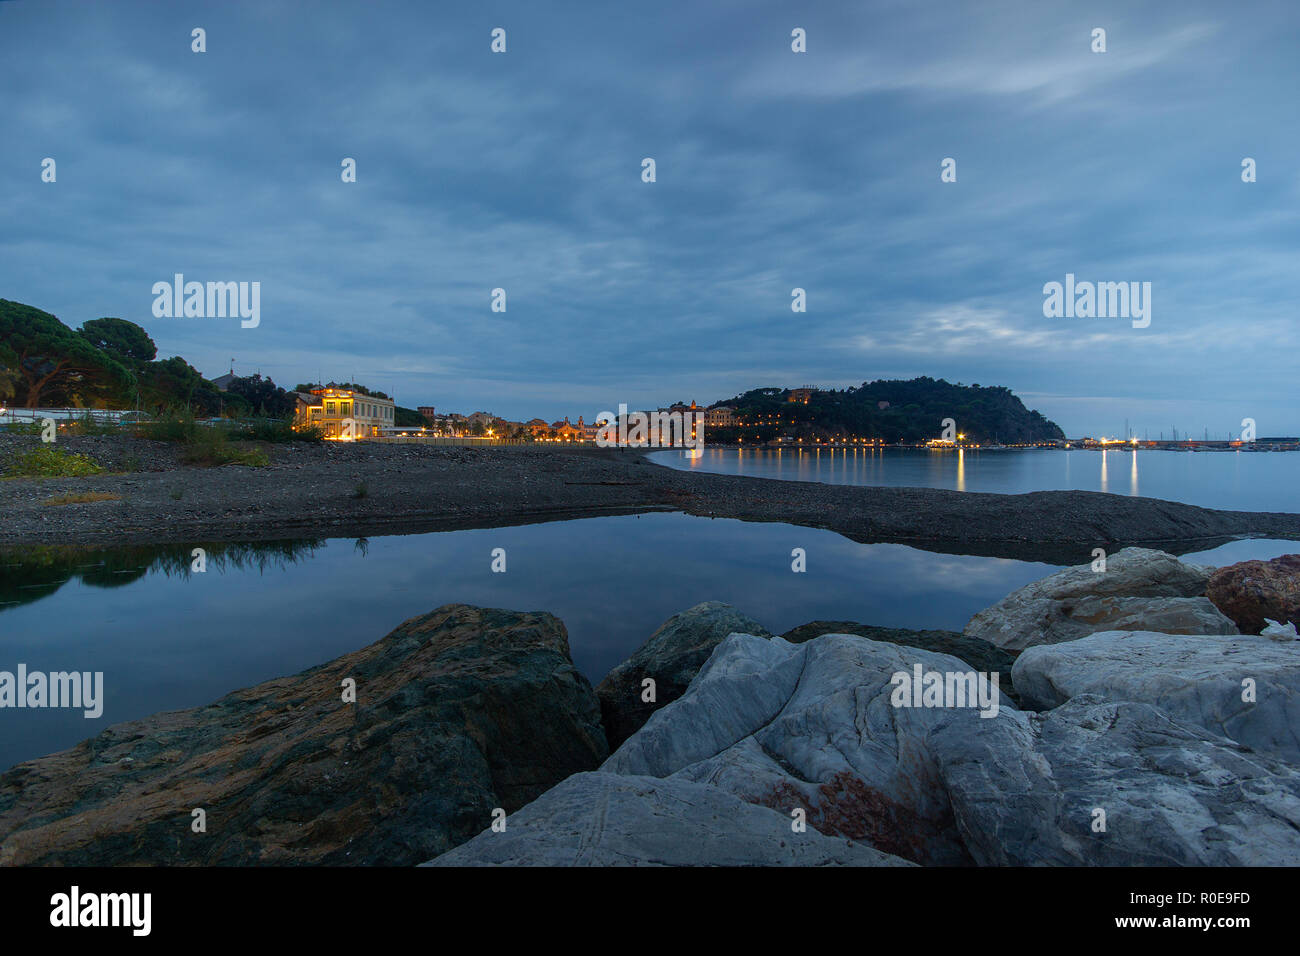 a beautiful wide angle view of the seaside shore of Sestri Levante, Ge, Liguria, Italy, at dusk, with rocks in the foreground Stock Photo